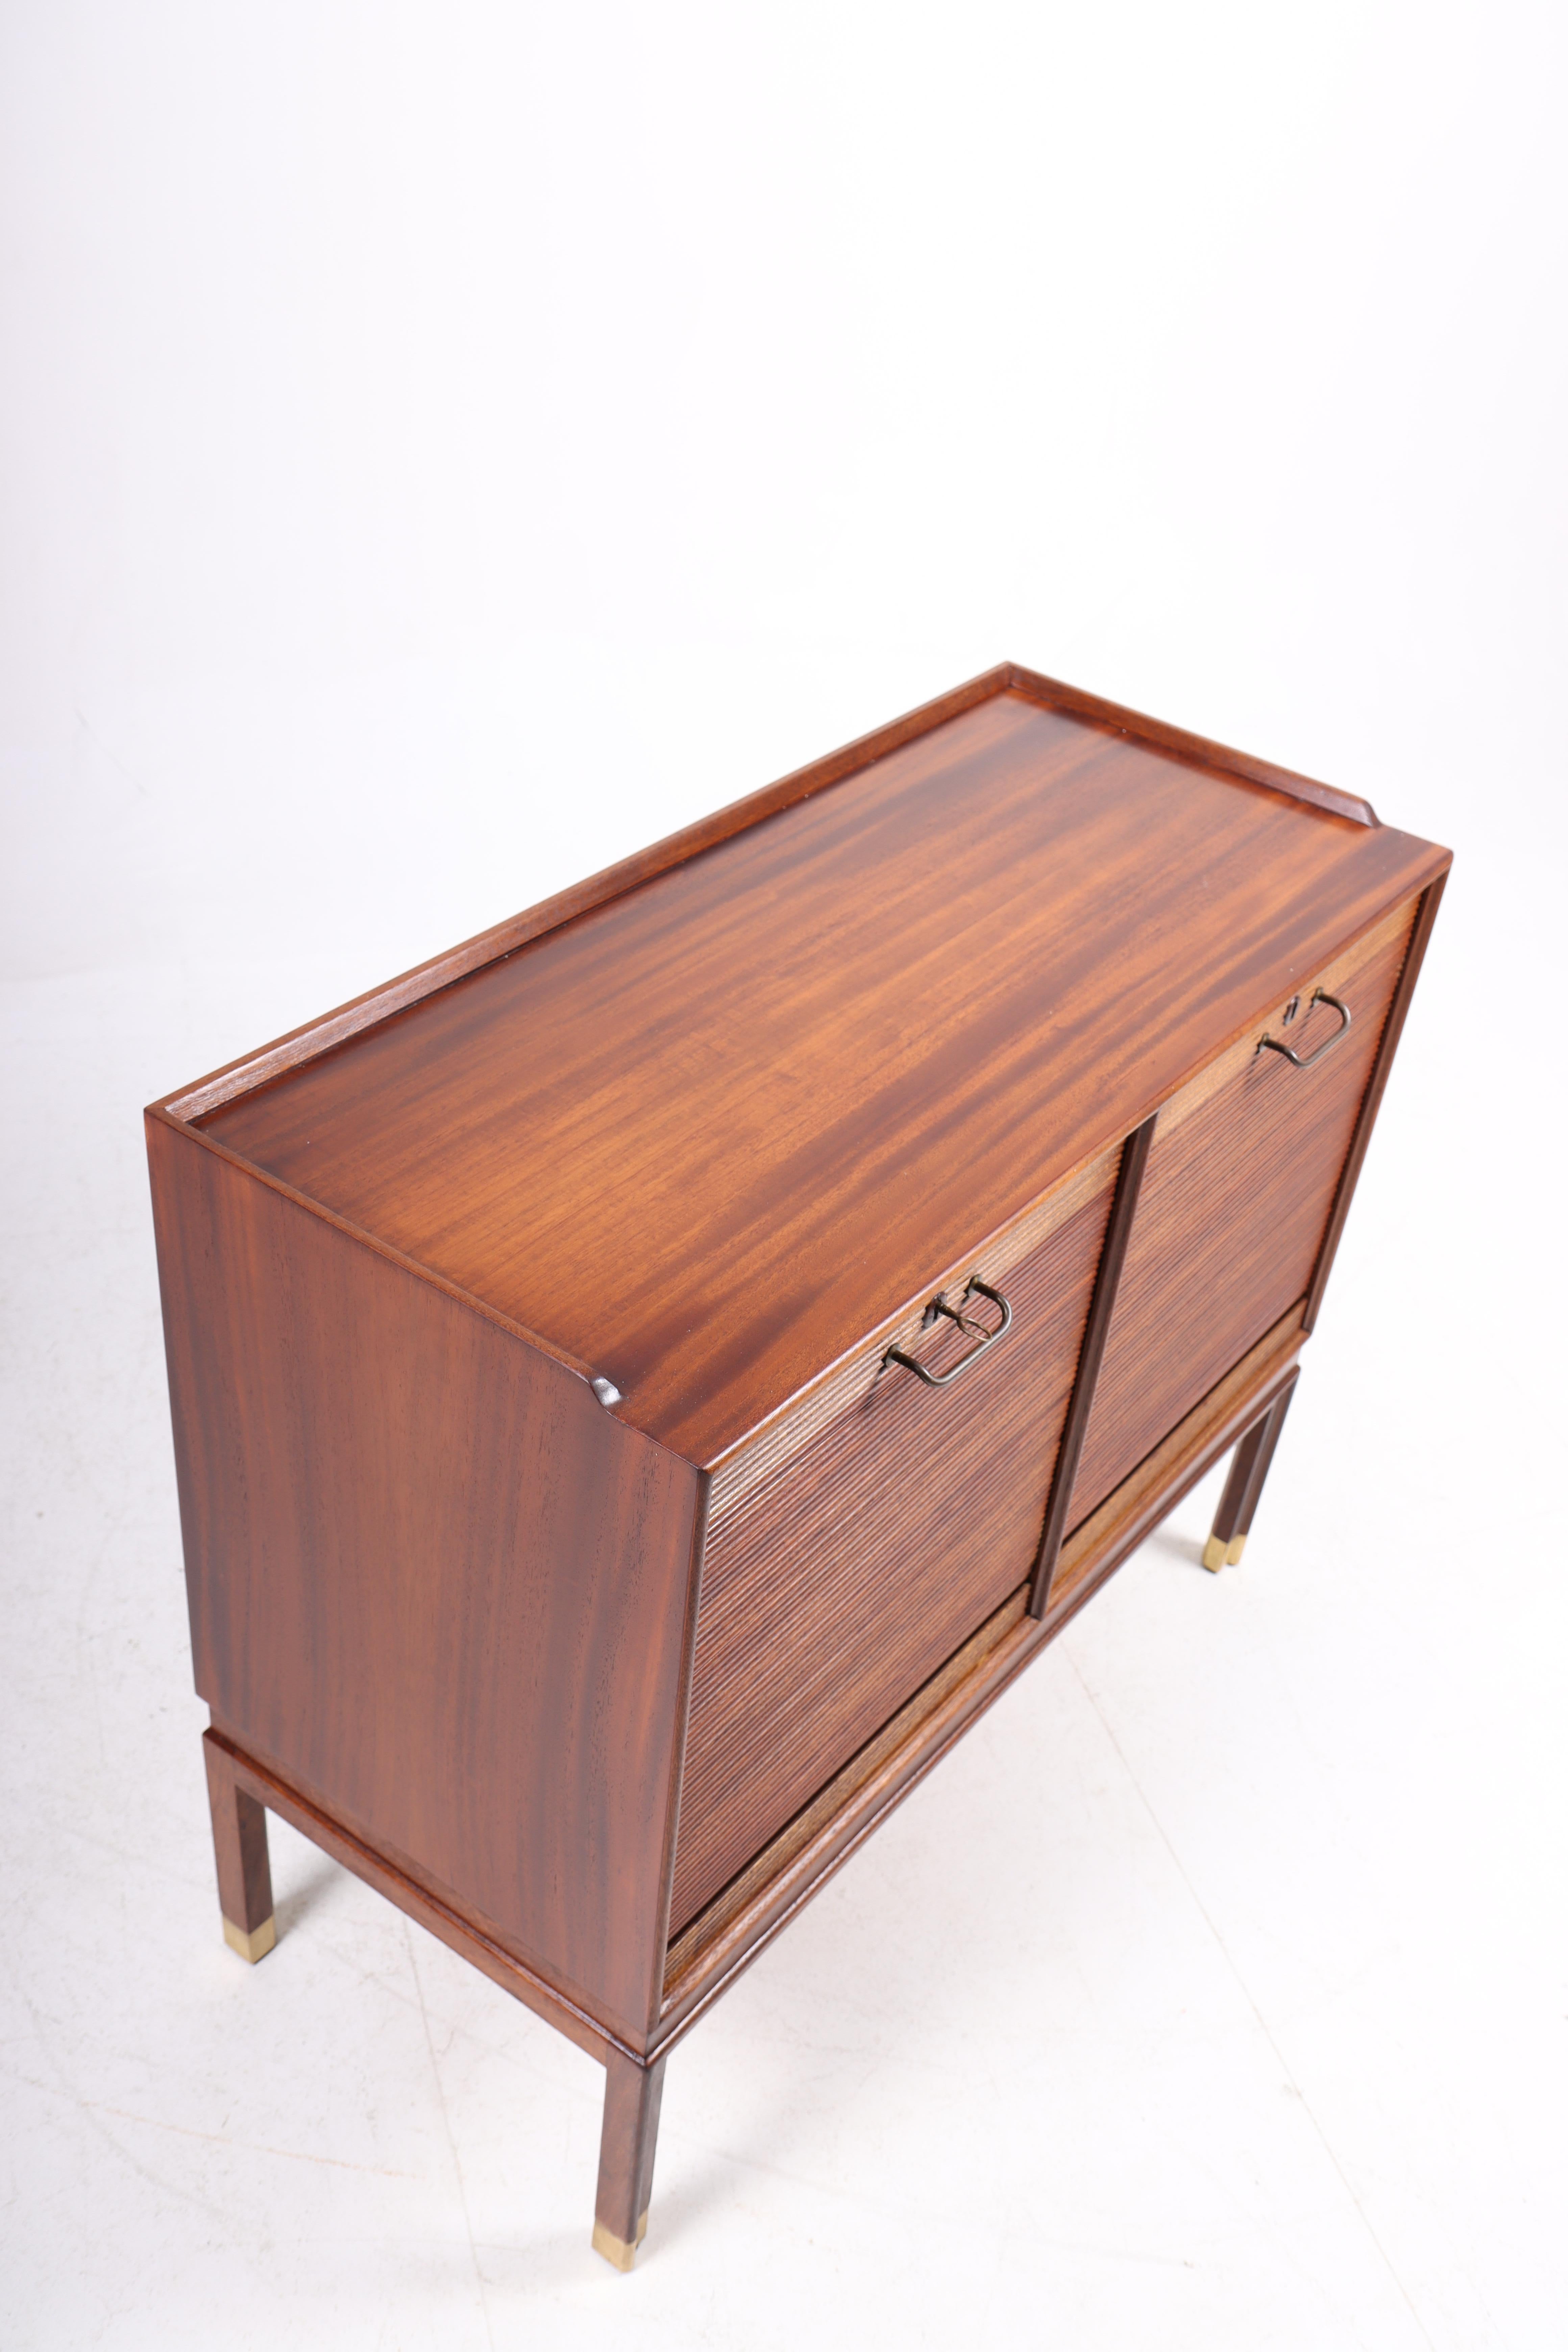 Midcentury File Cabinet in Mahogany with Tambour Doors, 1950s For Sale 1